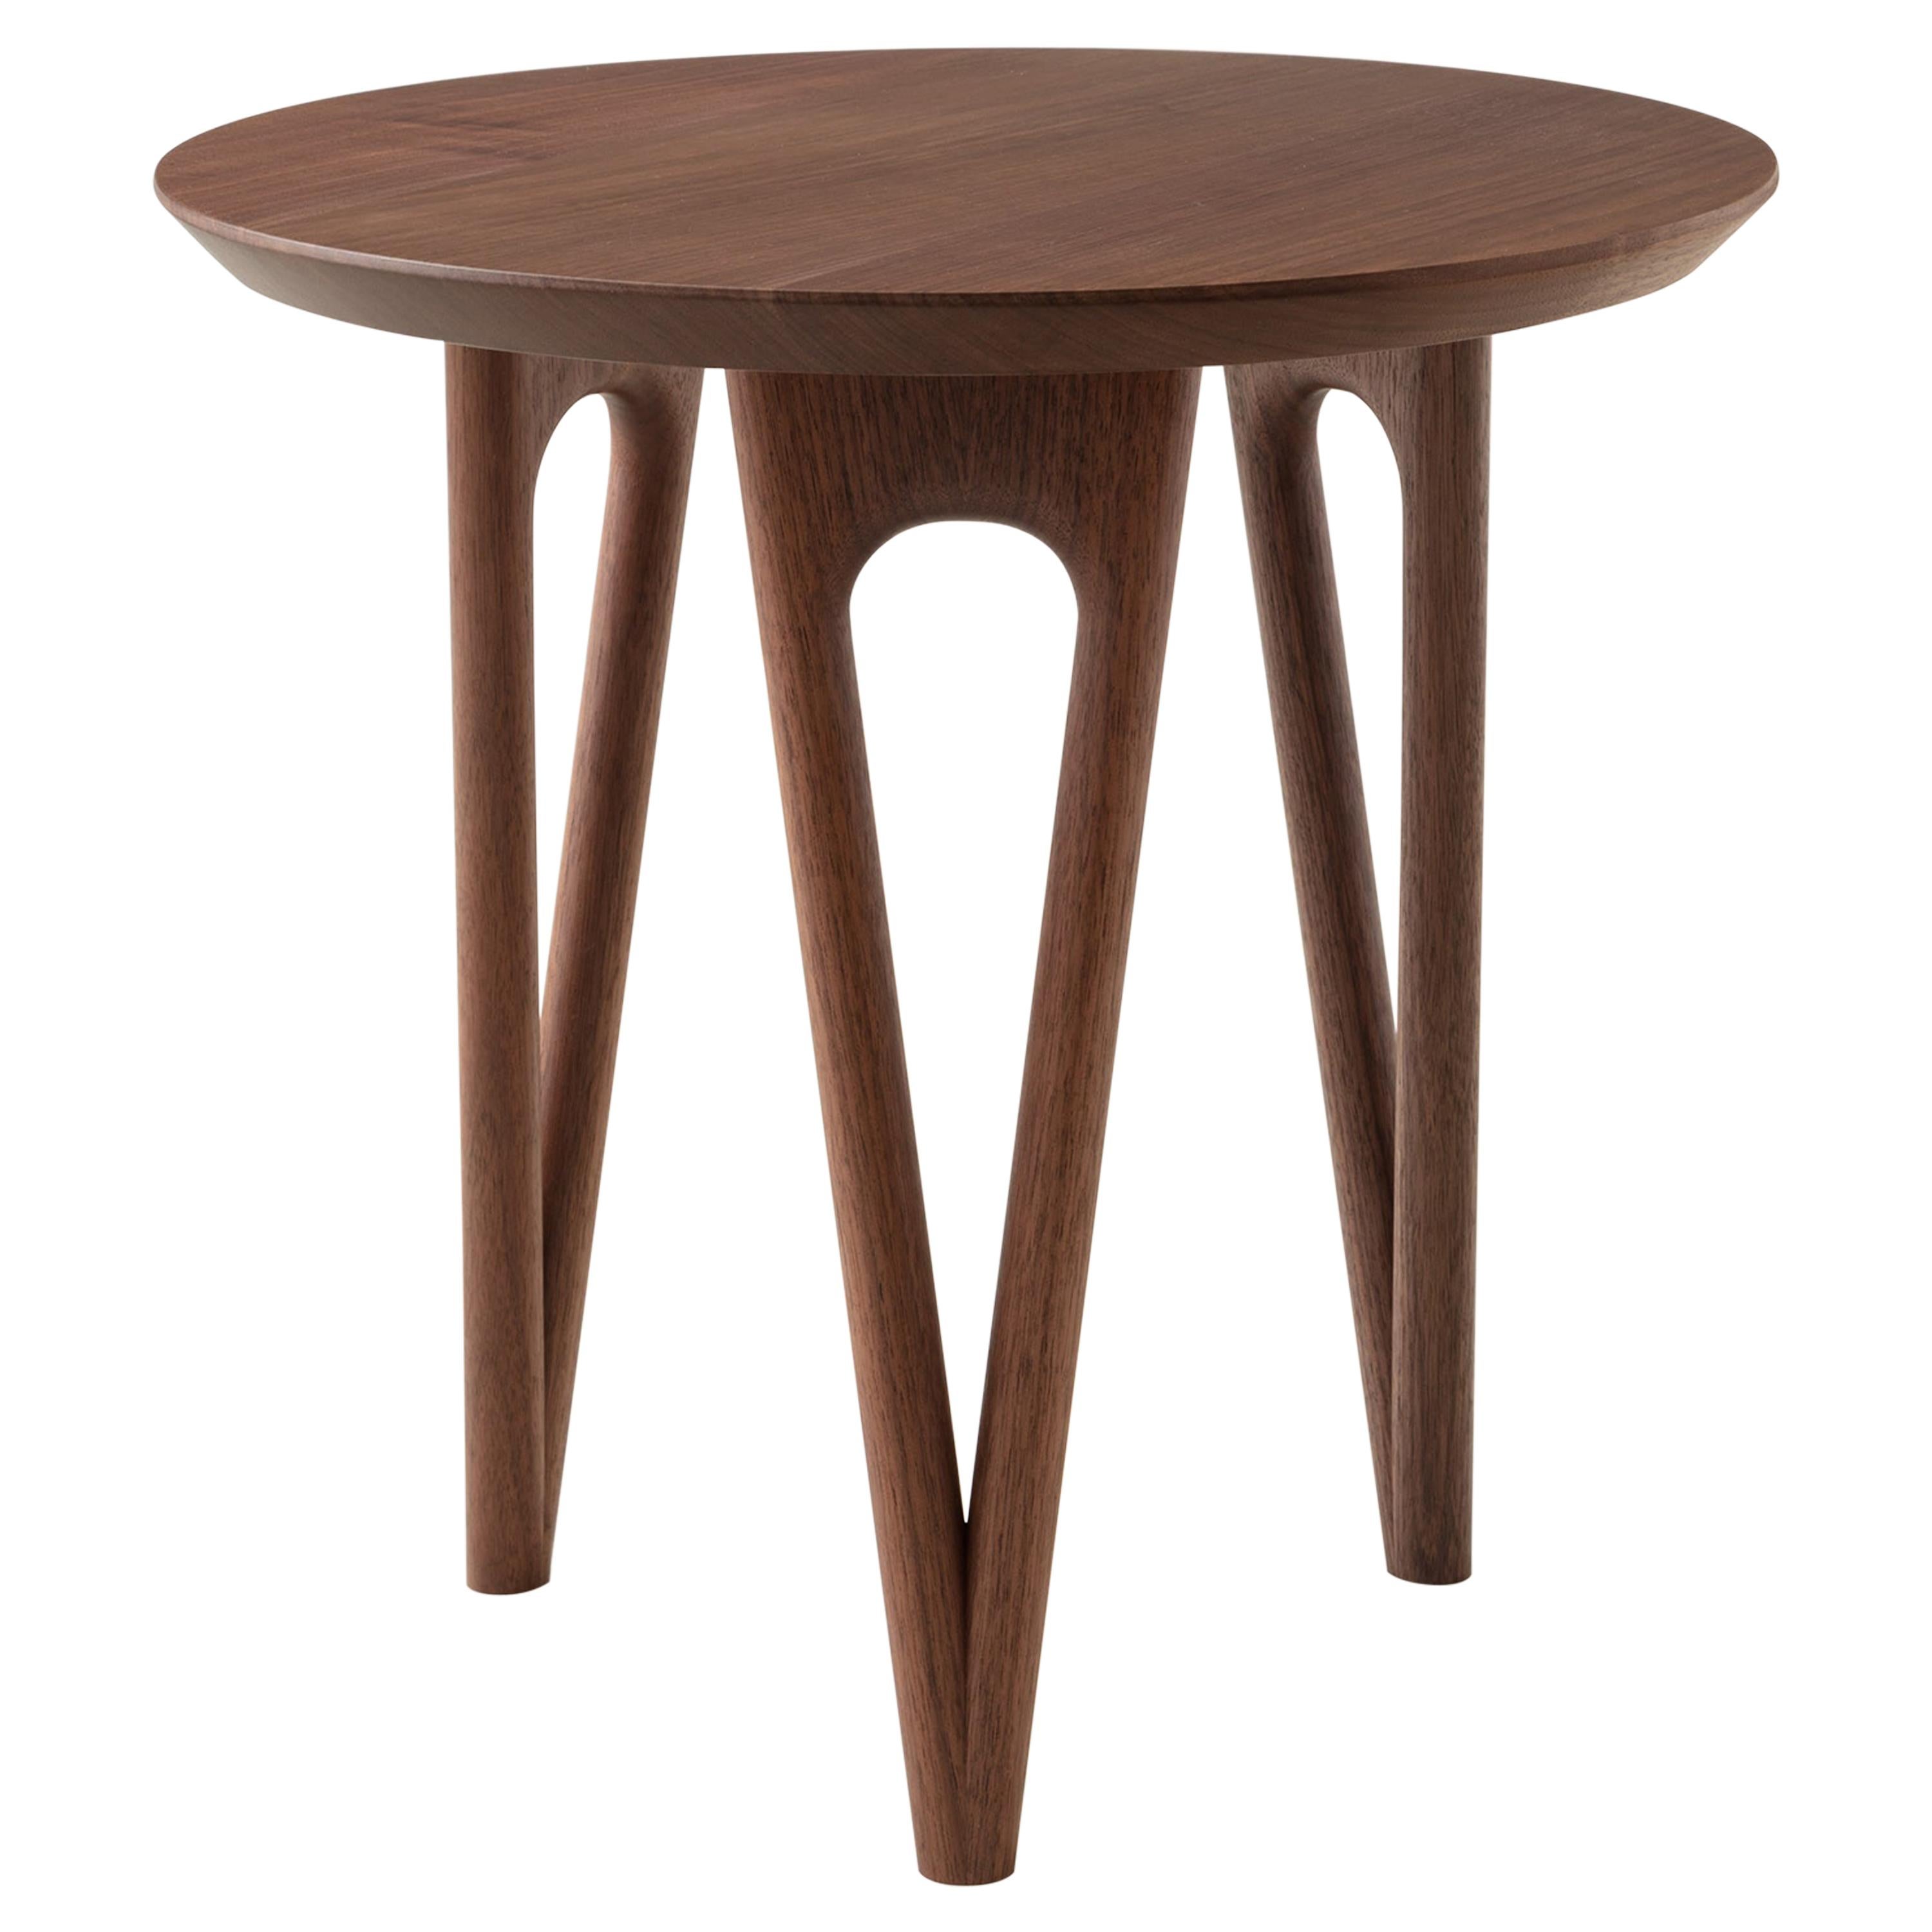 Hair Pin End, Side Table Shown in Black Walnut 18D x 18H, Made in USA